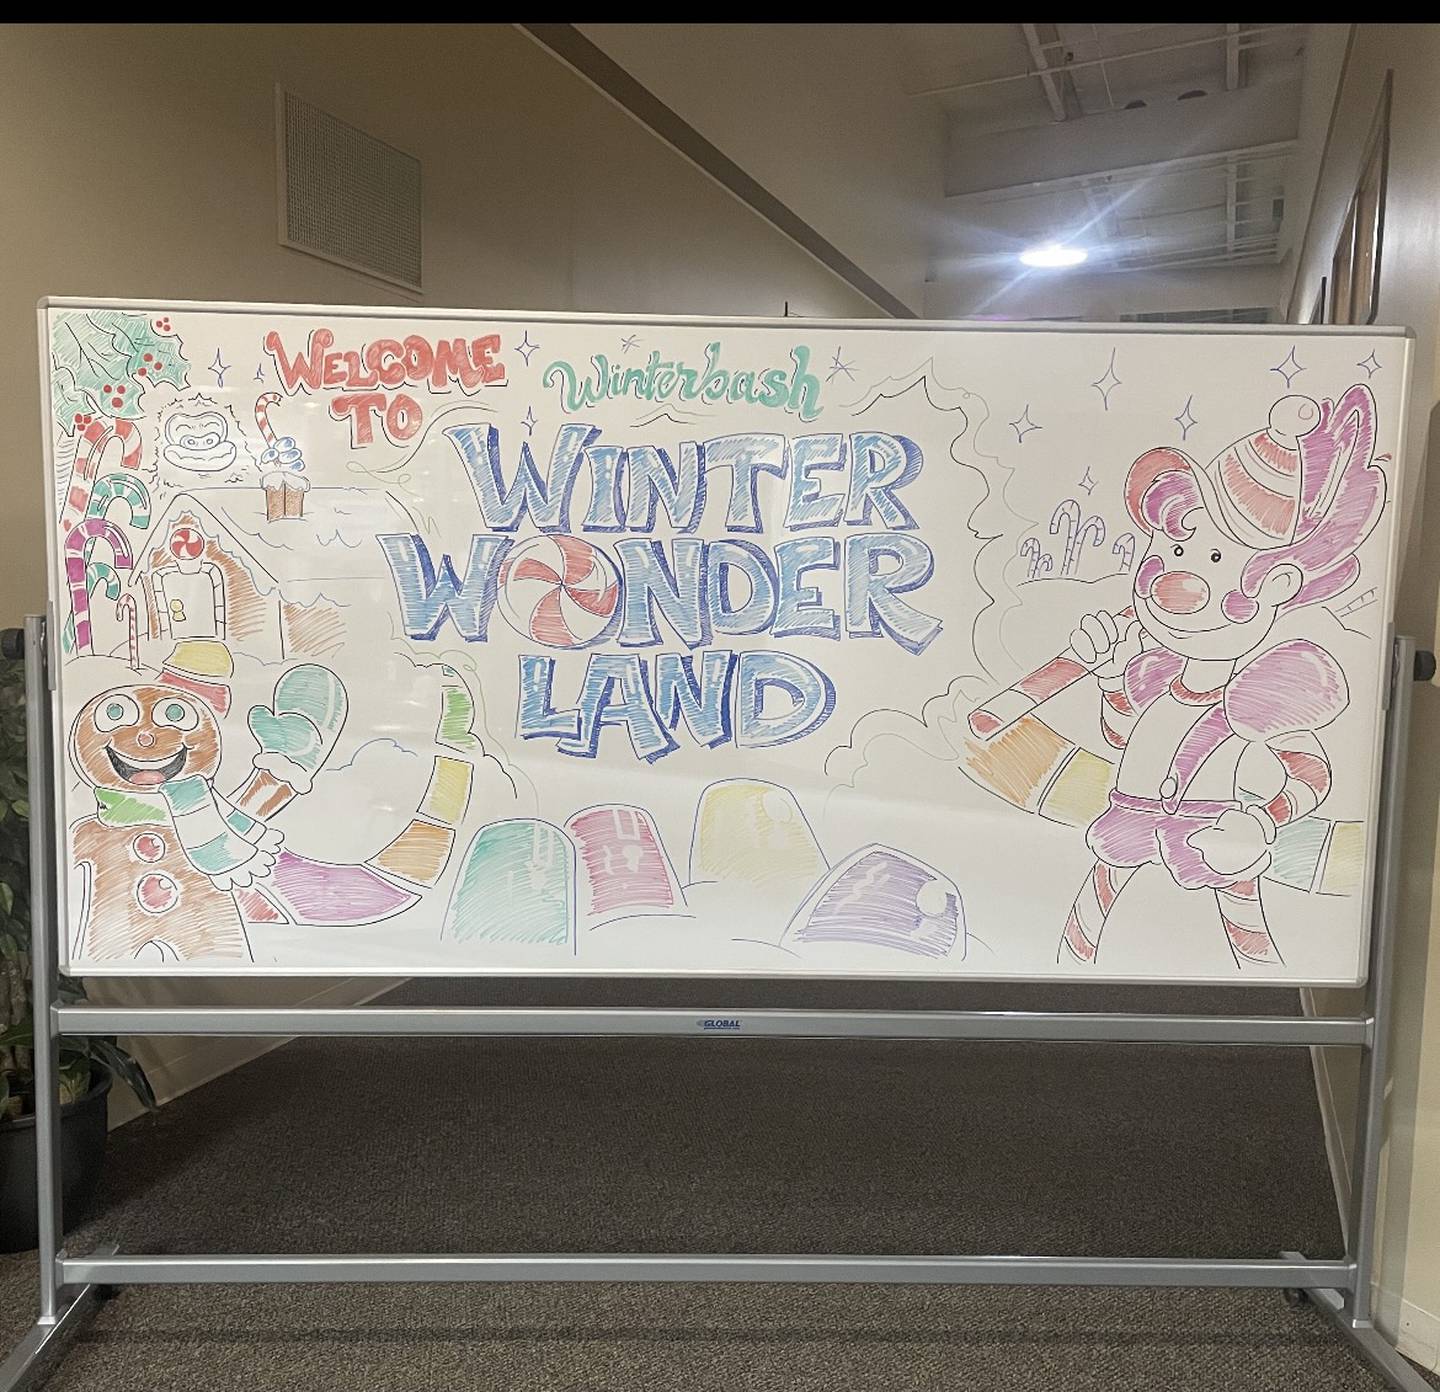 A sign for the DeKalb Chamber of Commerce's Winterbash: Winter Wonderland is posted during its end-of-the-year event at Proven Winners, OC Creative on Tuesday, Dec. 7, 2021.